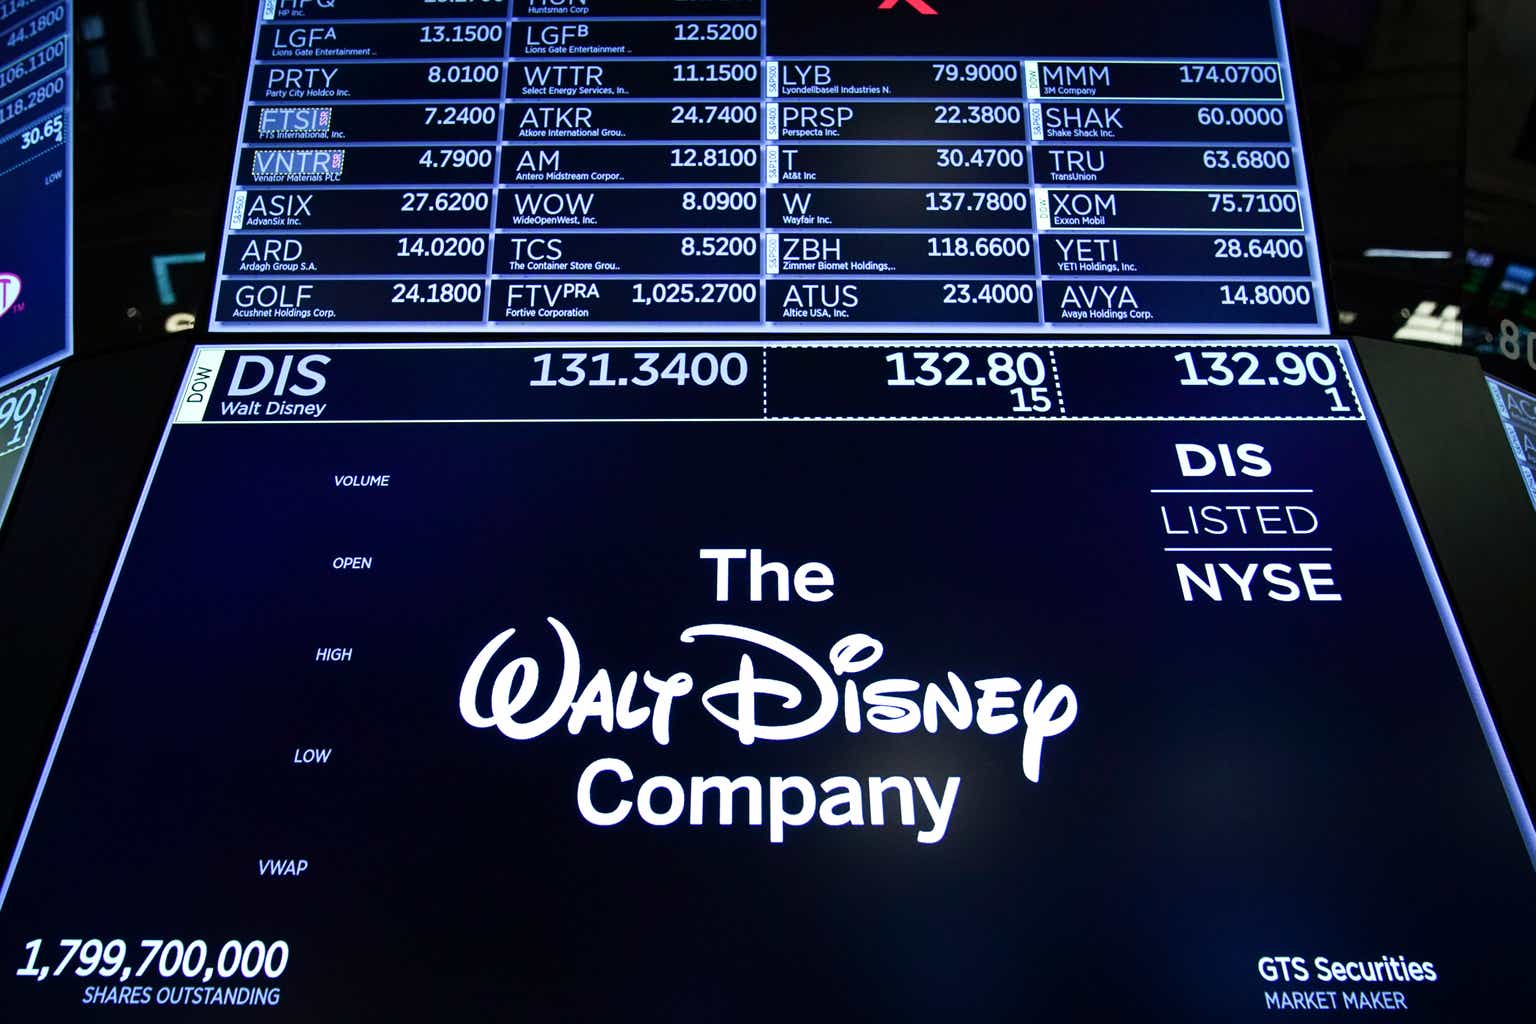 Disney's financial statements prove company became 'too woke' and